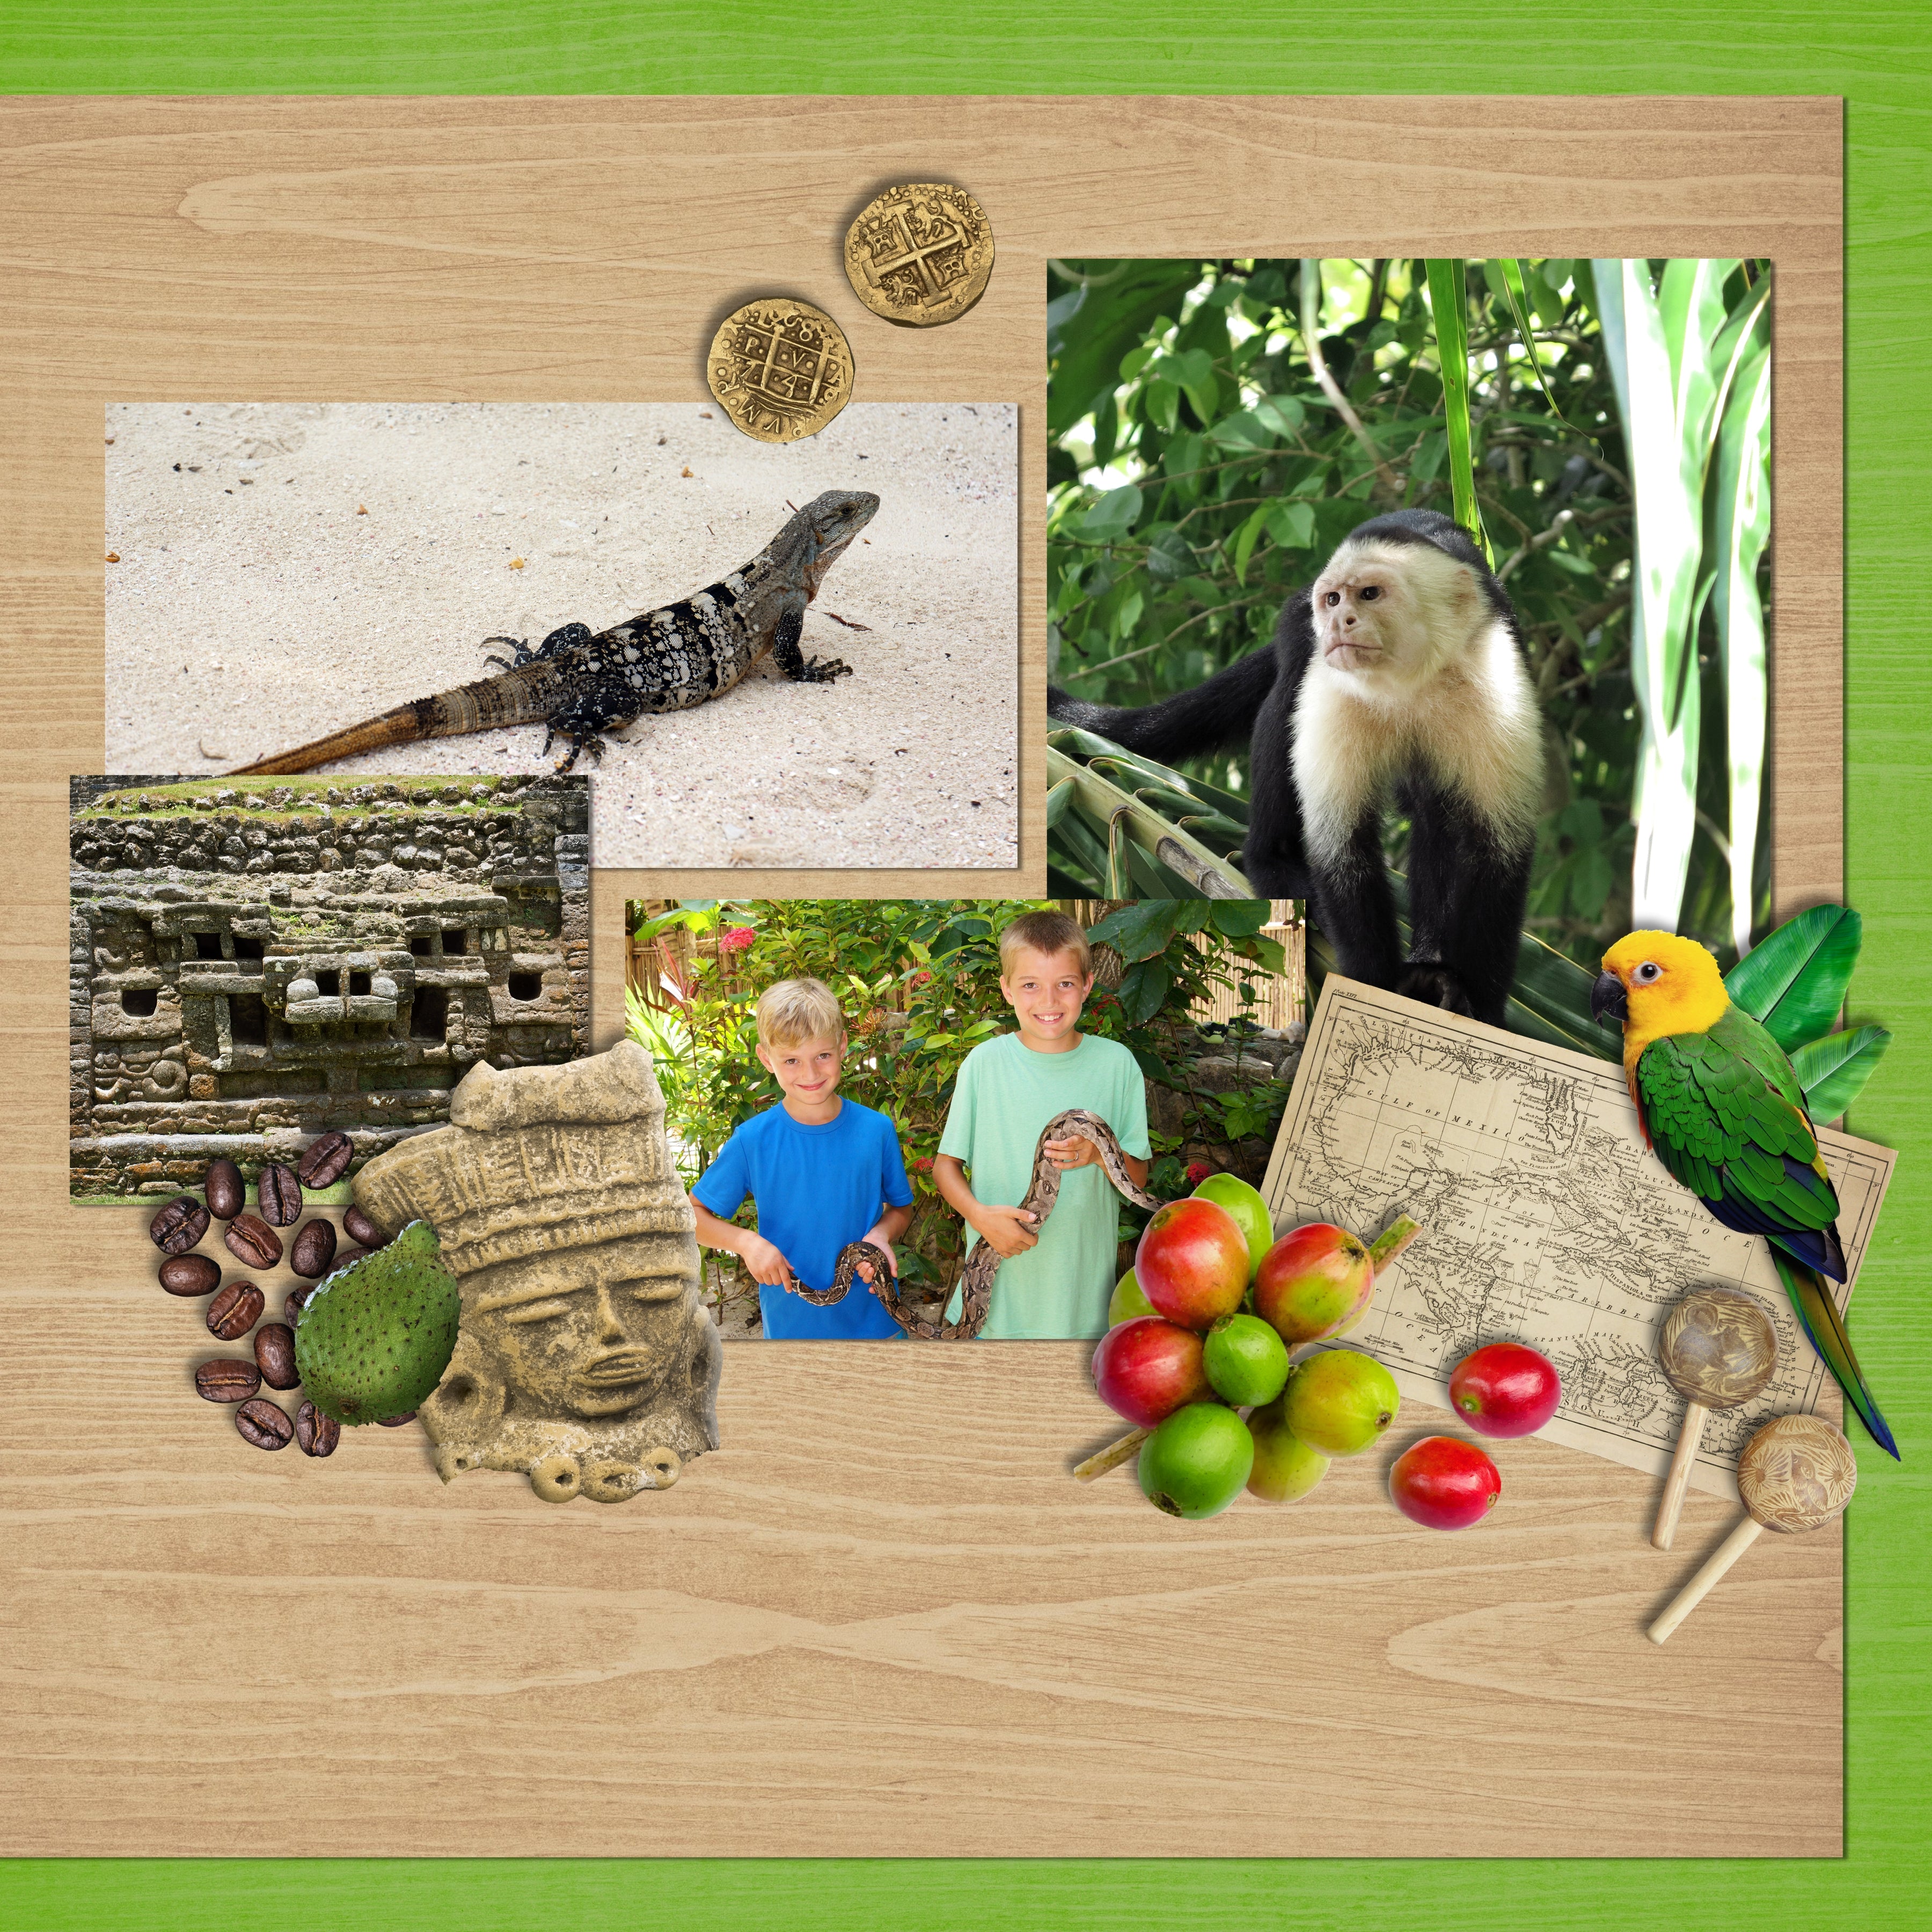 The Latin American Adventure Digital Scrapbook Kit is a diverse collection of digital art of Latin American embellishments, artifacts, and beautiful flora and fauna. If you have been meaning to document your memories from a trip to Central or South America or any of the Spanish/Portuguese speaking islands of the Caribbean, or are possibly planning a trip there soon, this collection is just what you need!